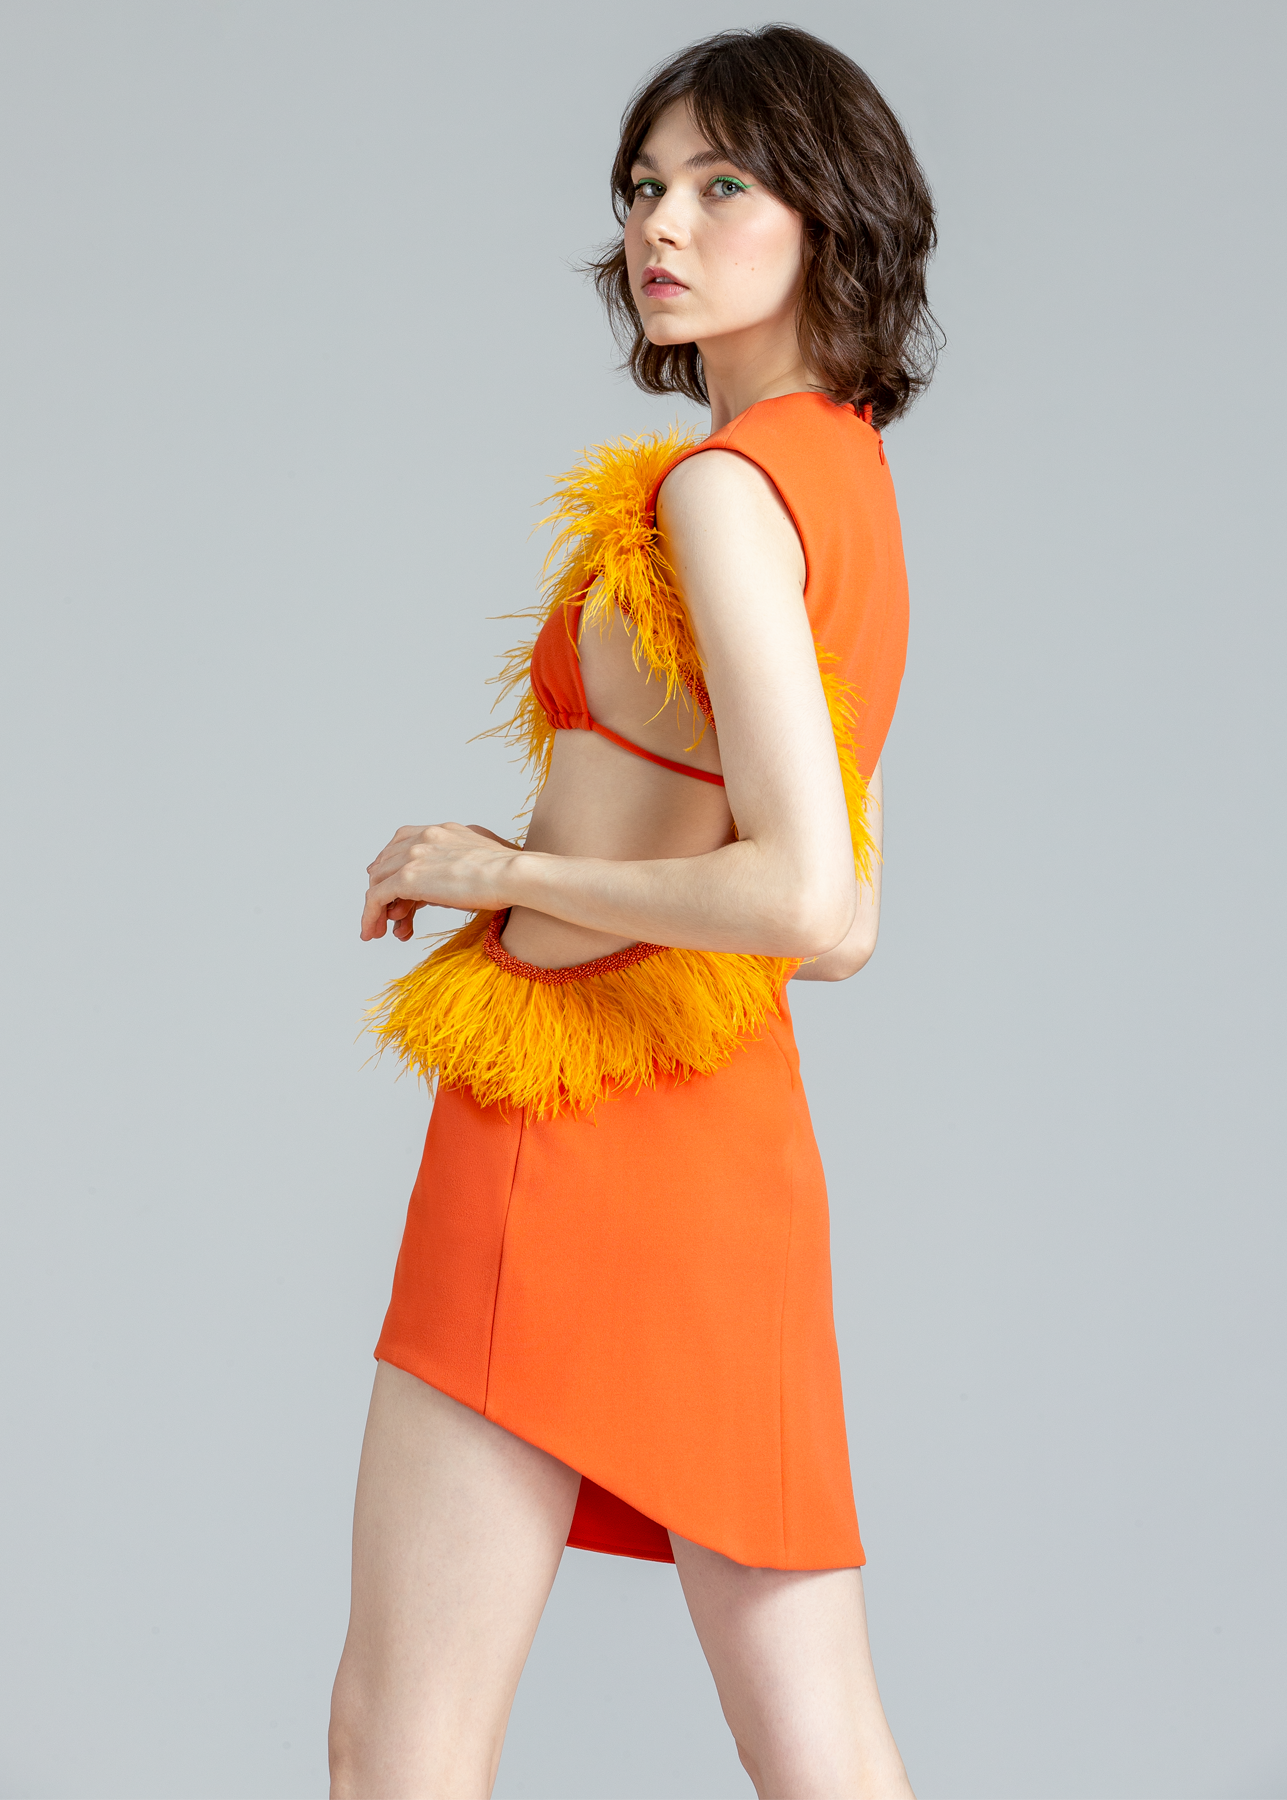 DRESS W/ FEATHERS AND TECHNO CREPE TOP